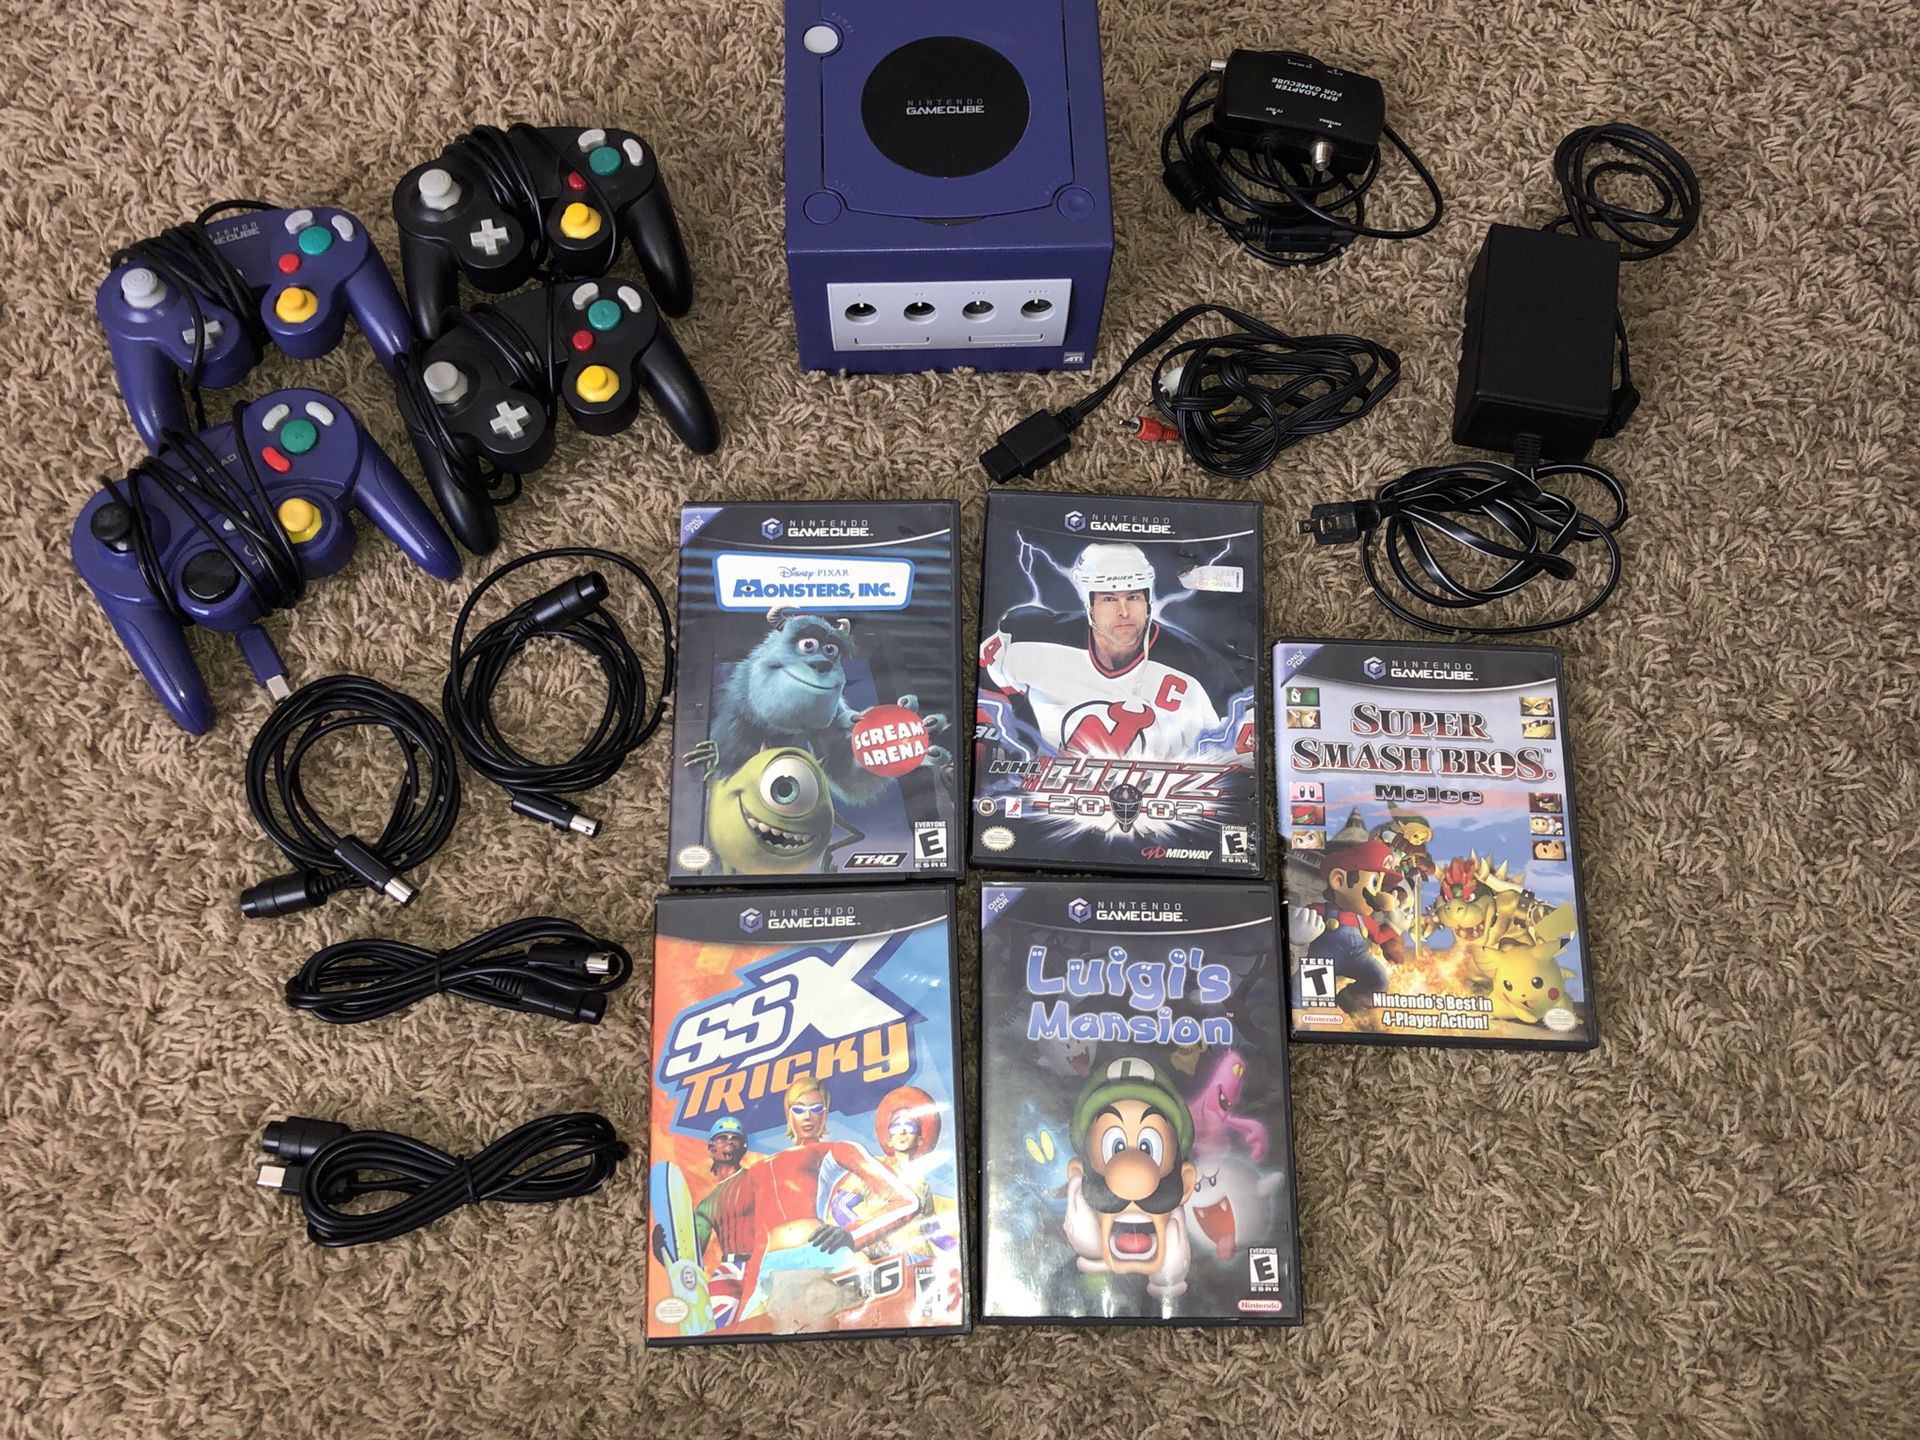 Nintendo GameCube - full system and games